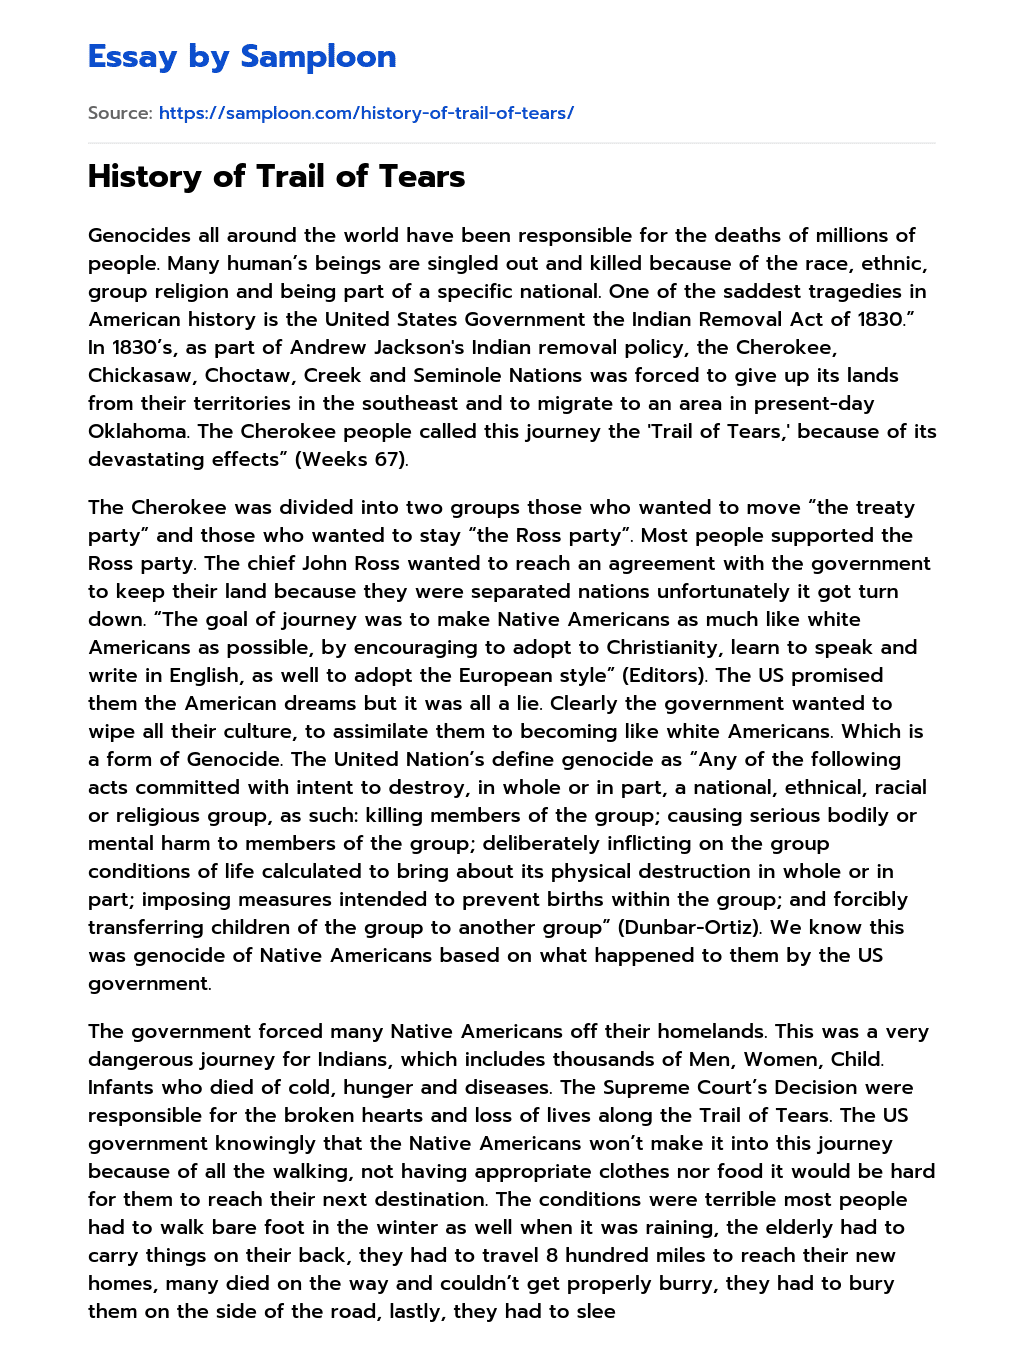 thesis for trail of tears essay